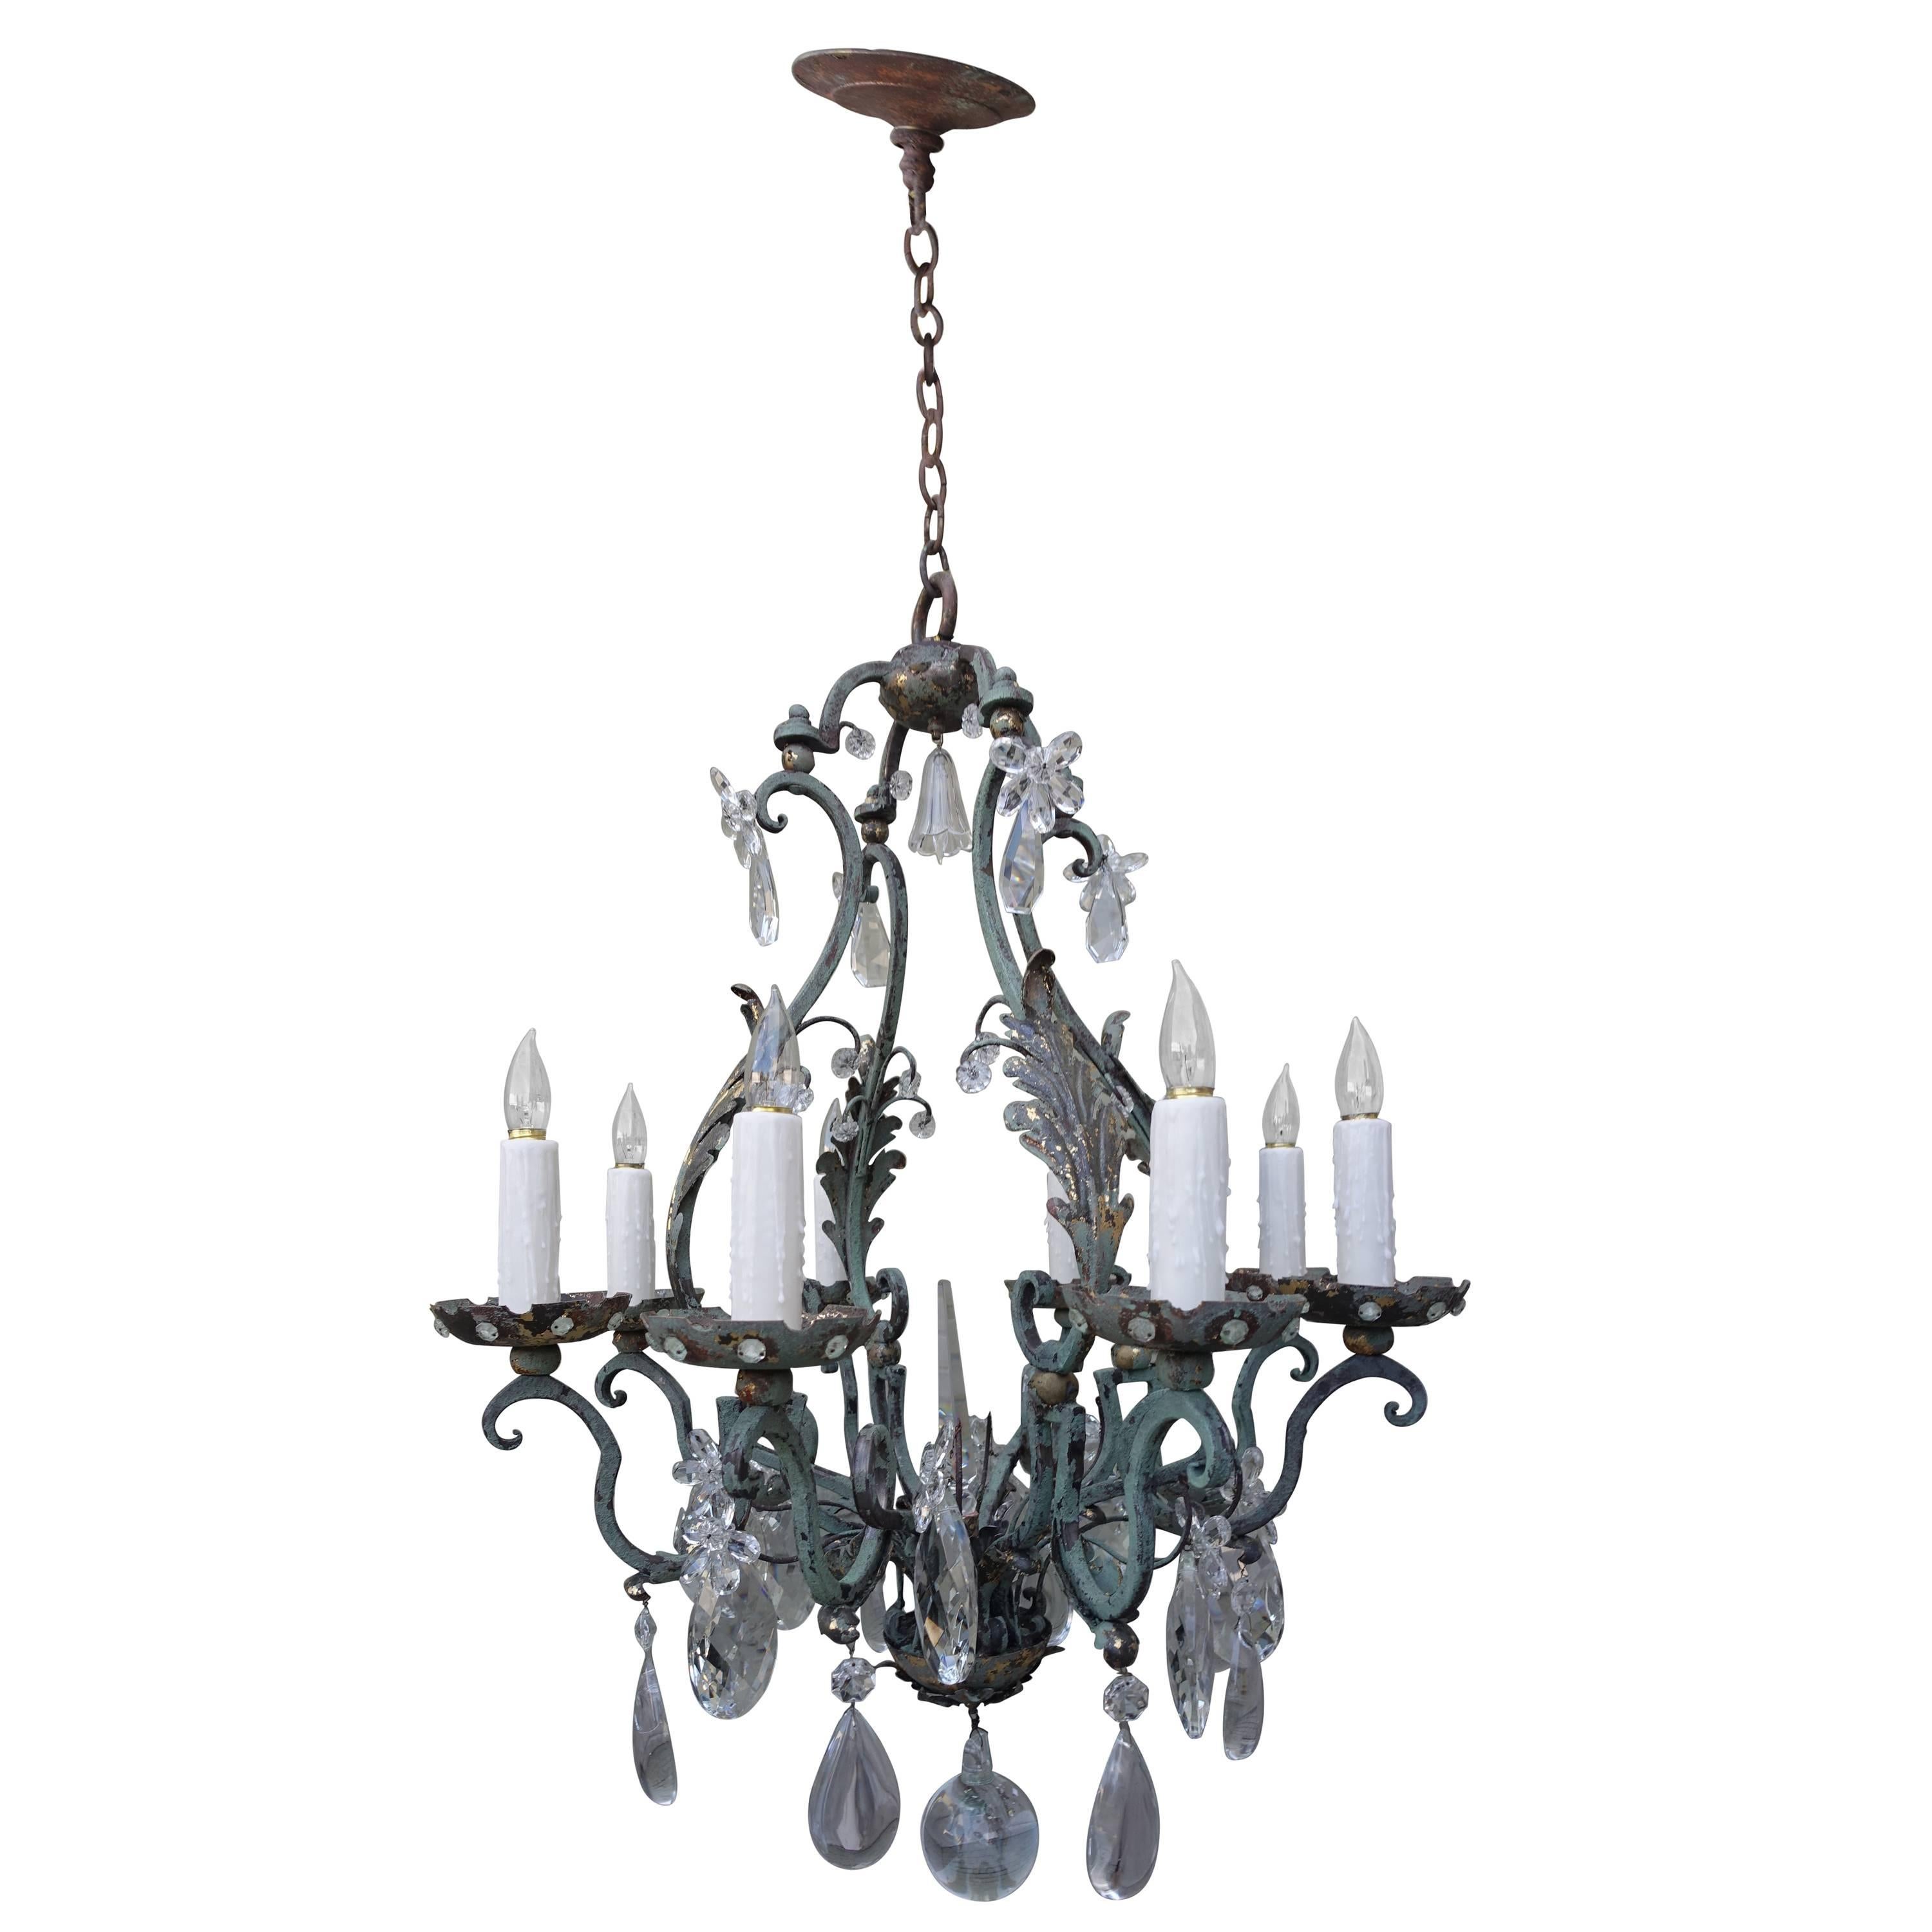 Painted Wrought Iron Crystal Chandelier